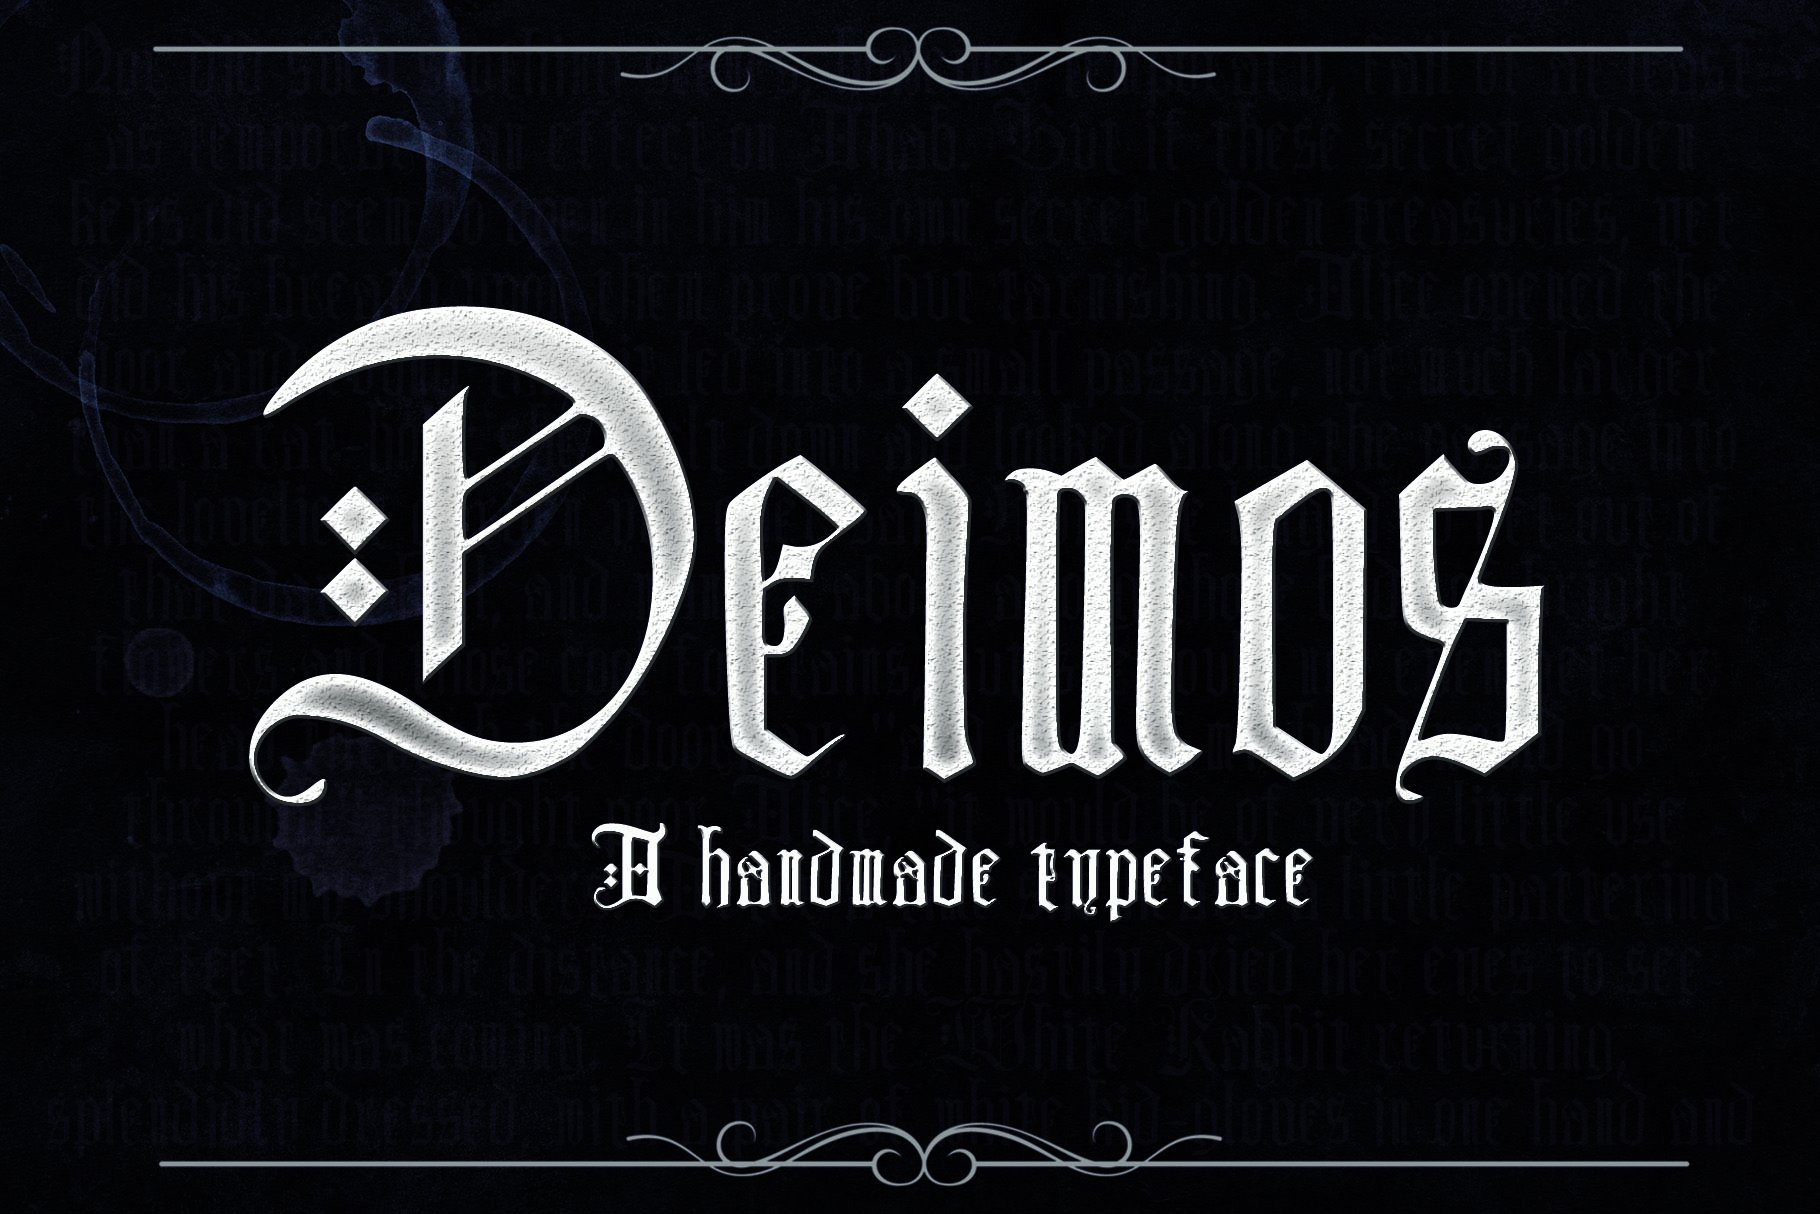 DEIMOS, a Blackletter Typeface cover image.